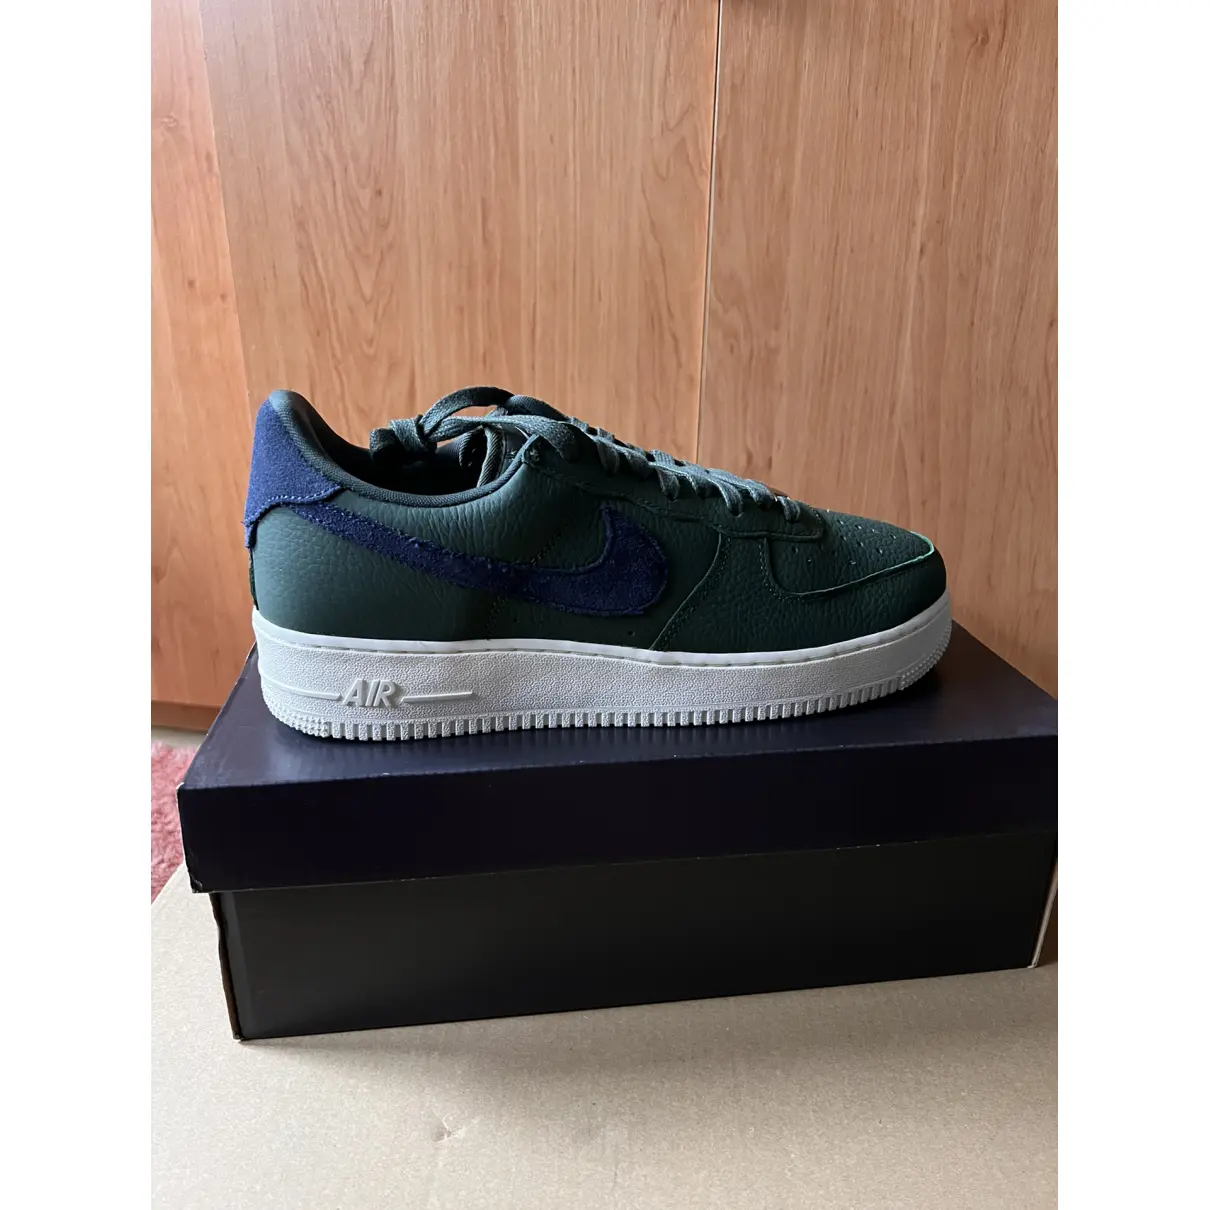 Buy Nike Air Force 1 leather low trainers online